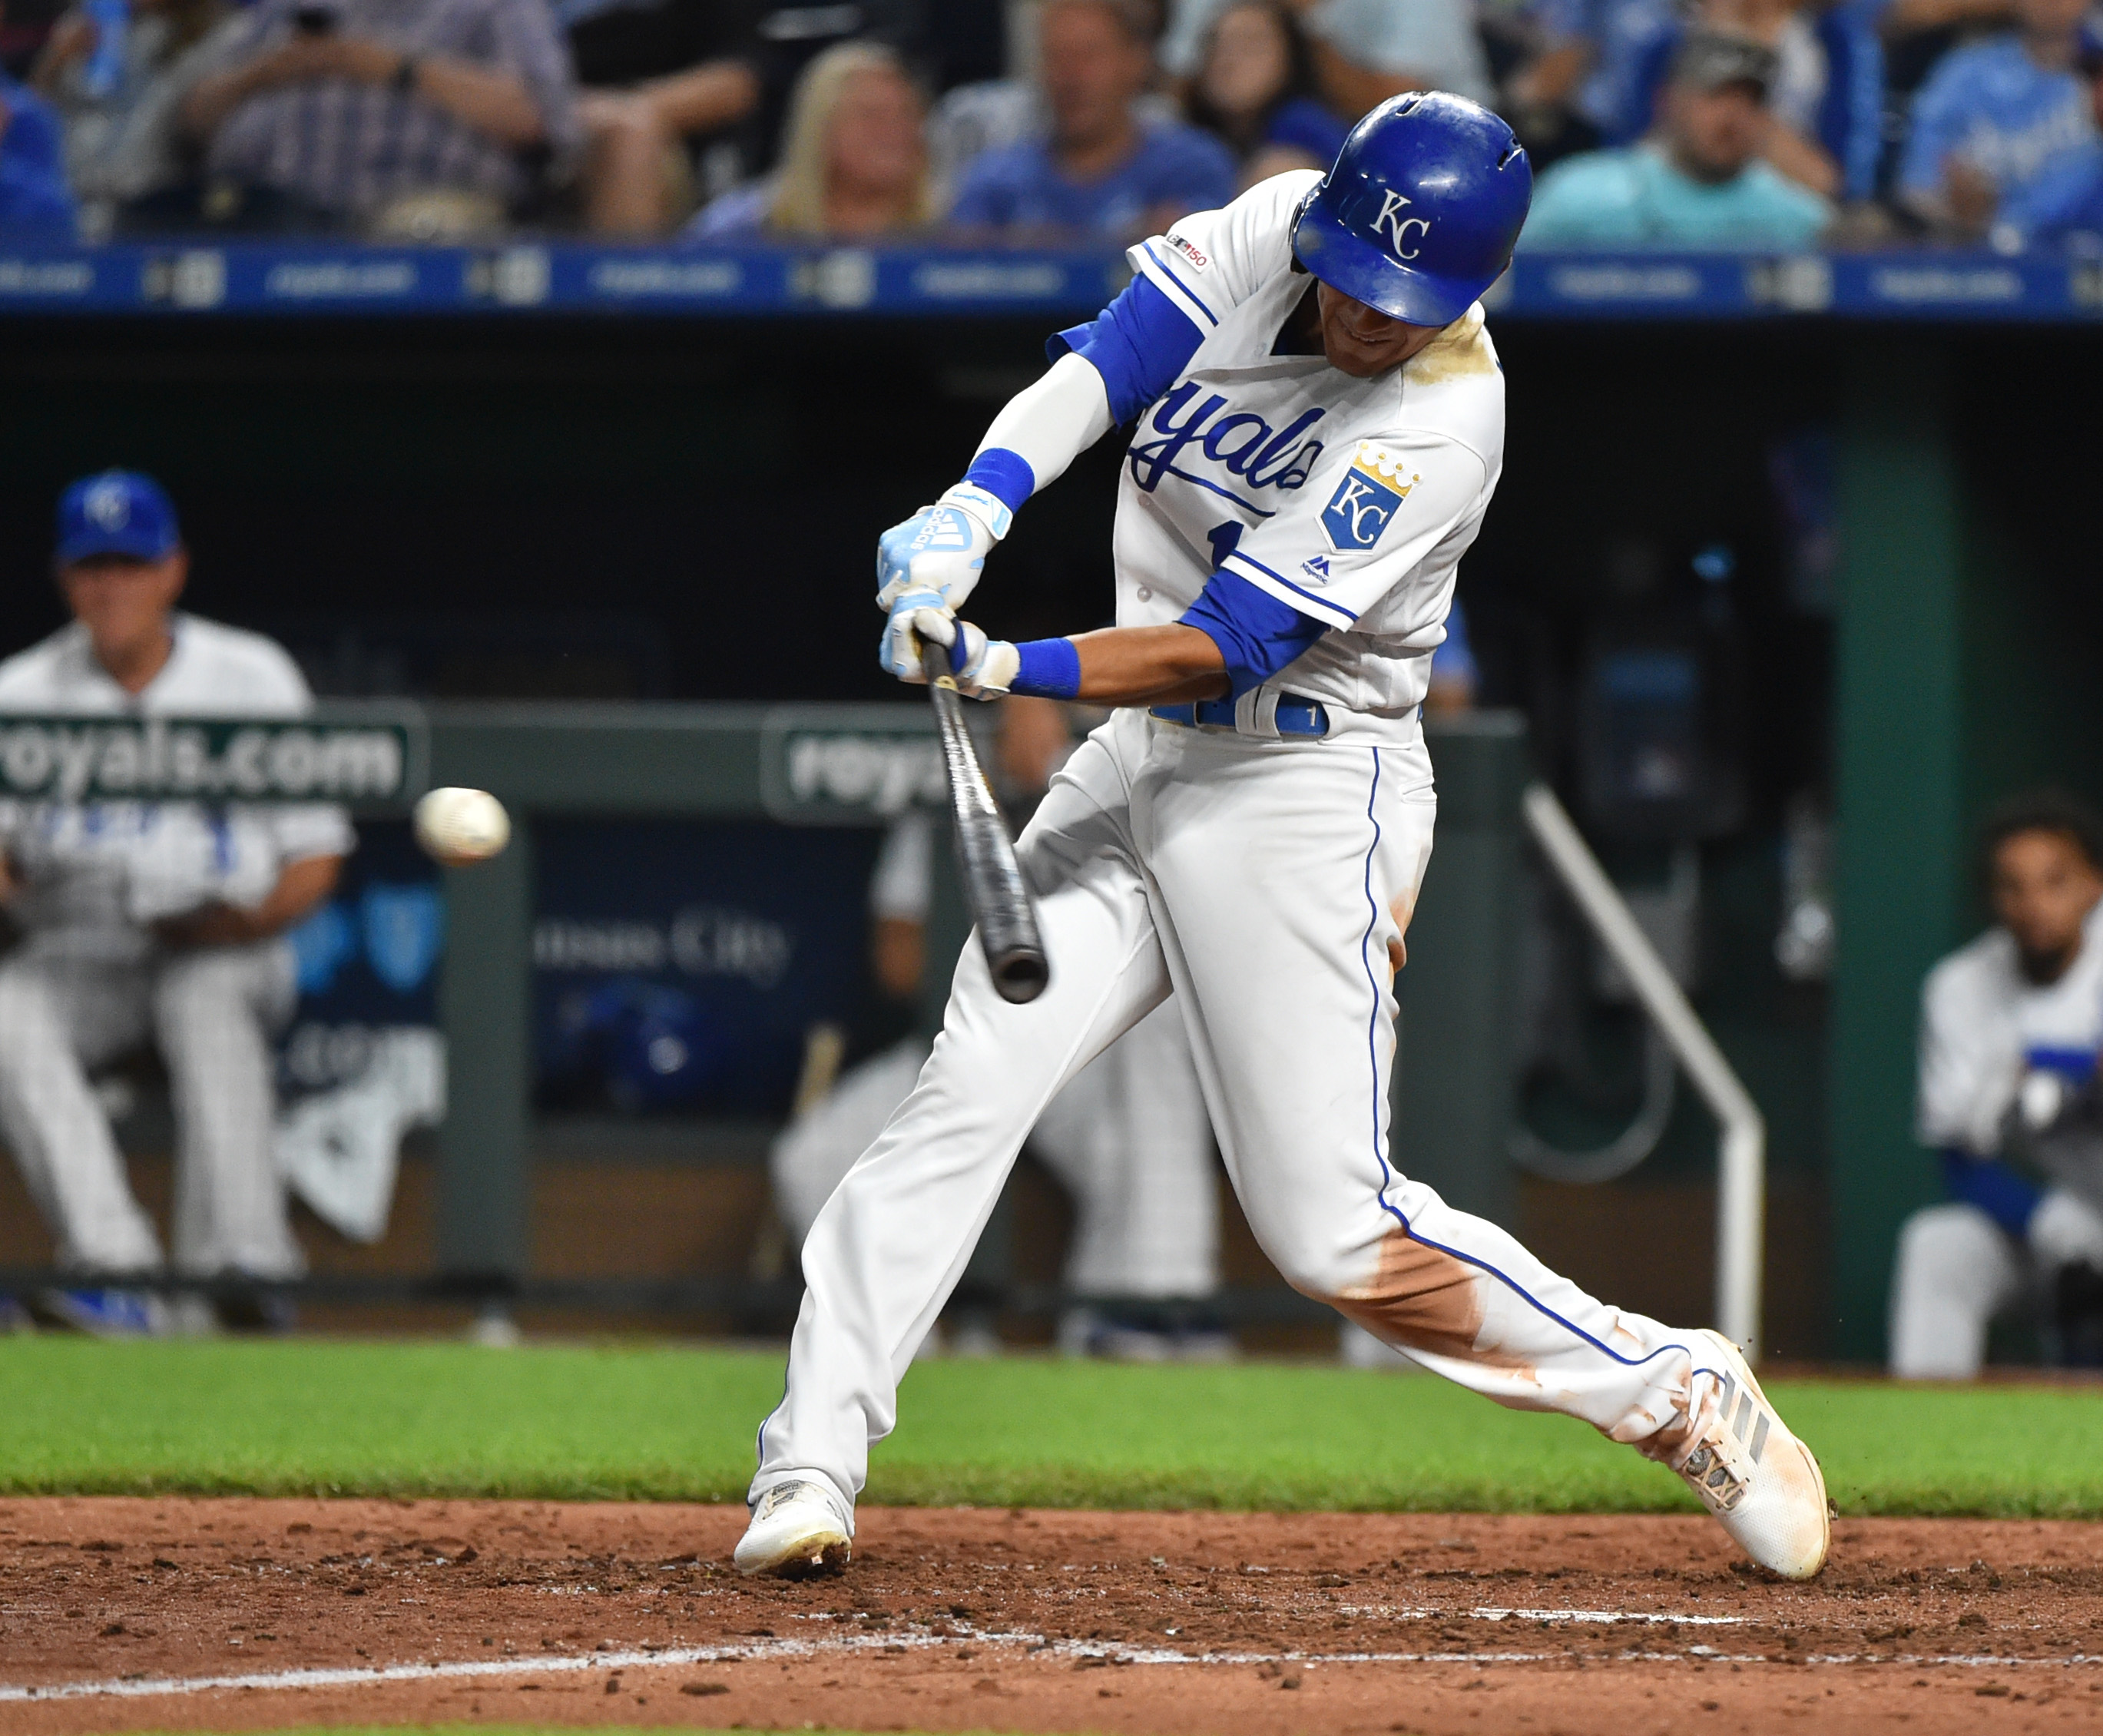 Nicky Lopez #1 of the Kansas City Royals hits a RBI single in the sixth inning against the Chicago White Sox at Kauffman Stadium on July 15, 2019 in Kansas City, Missouri.